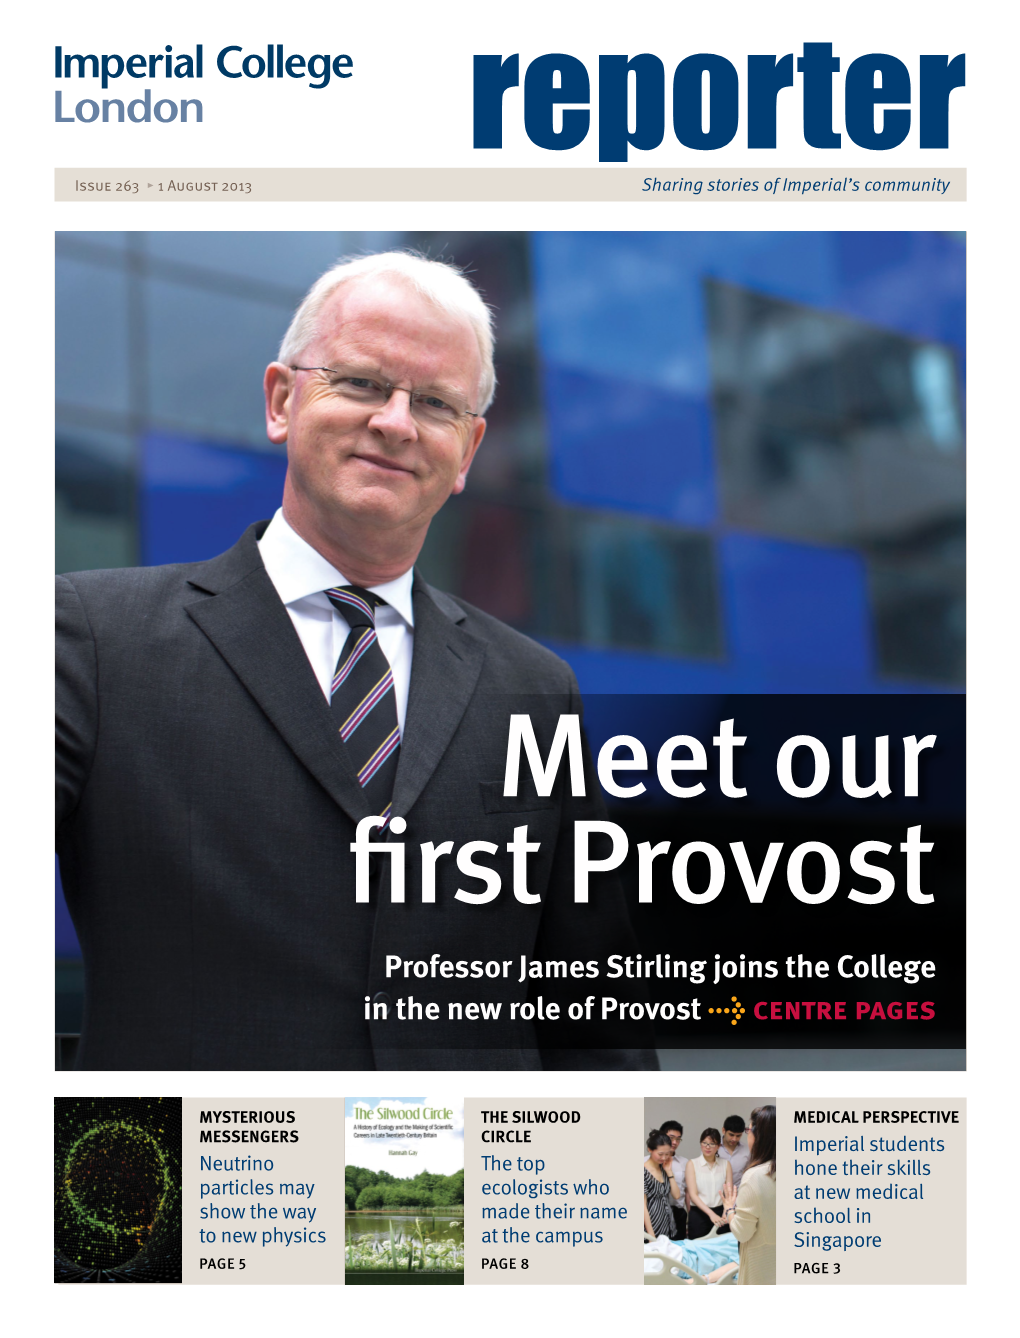 Professor James Stirling Joins the College in the New Role of Provost → Centre Pages